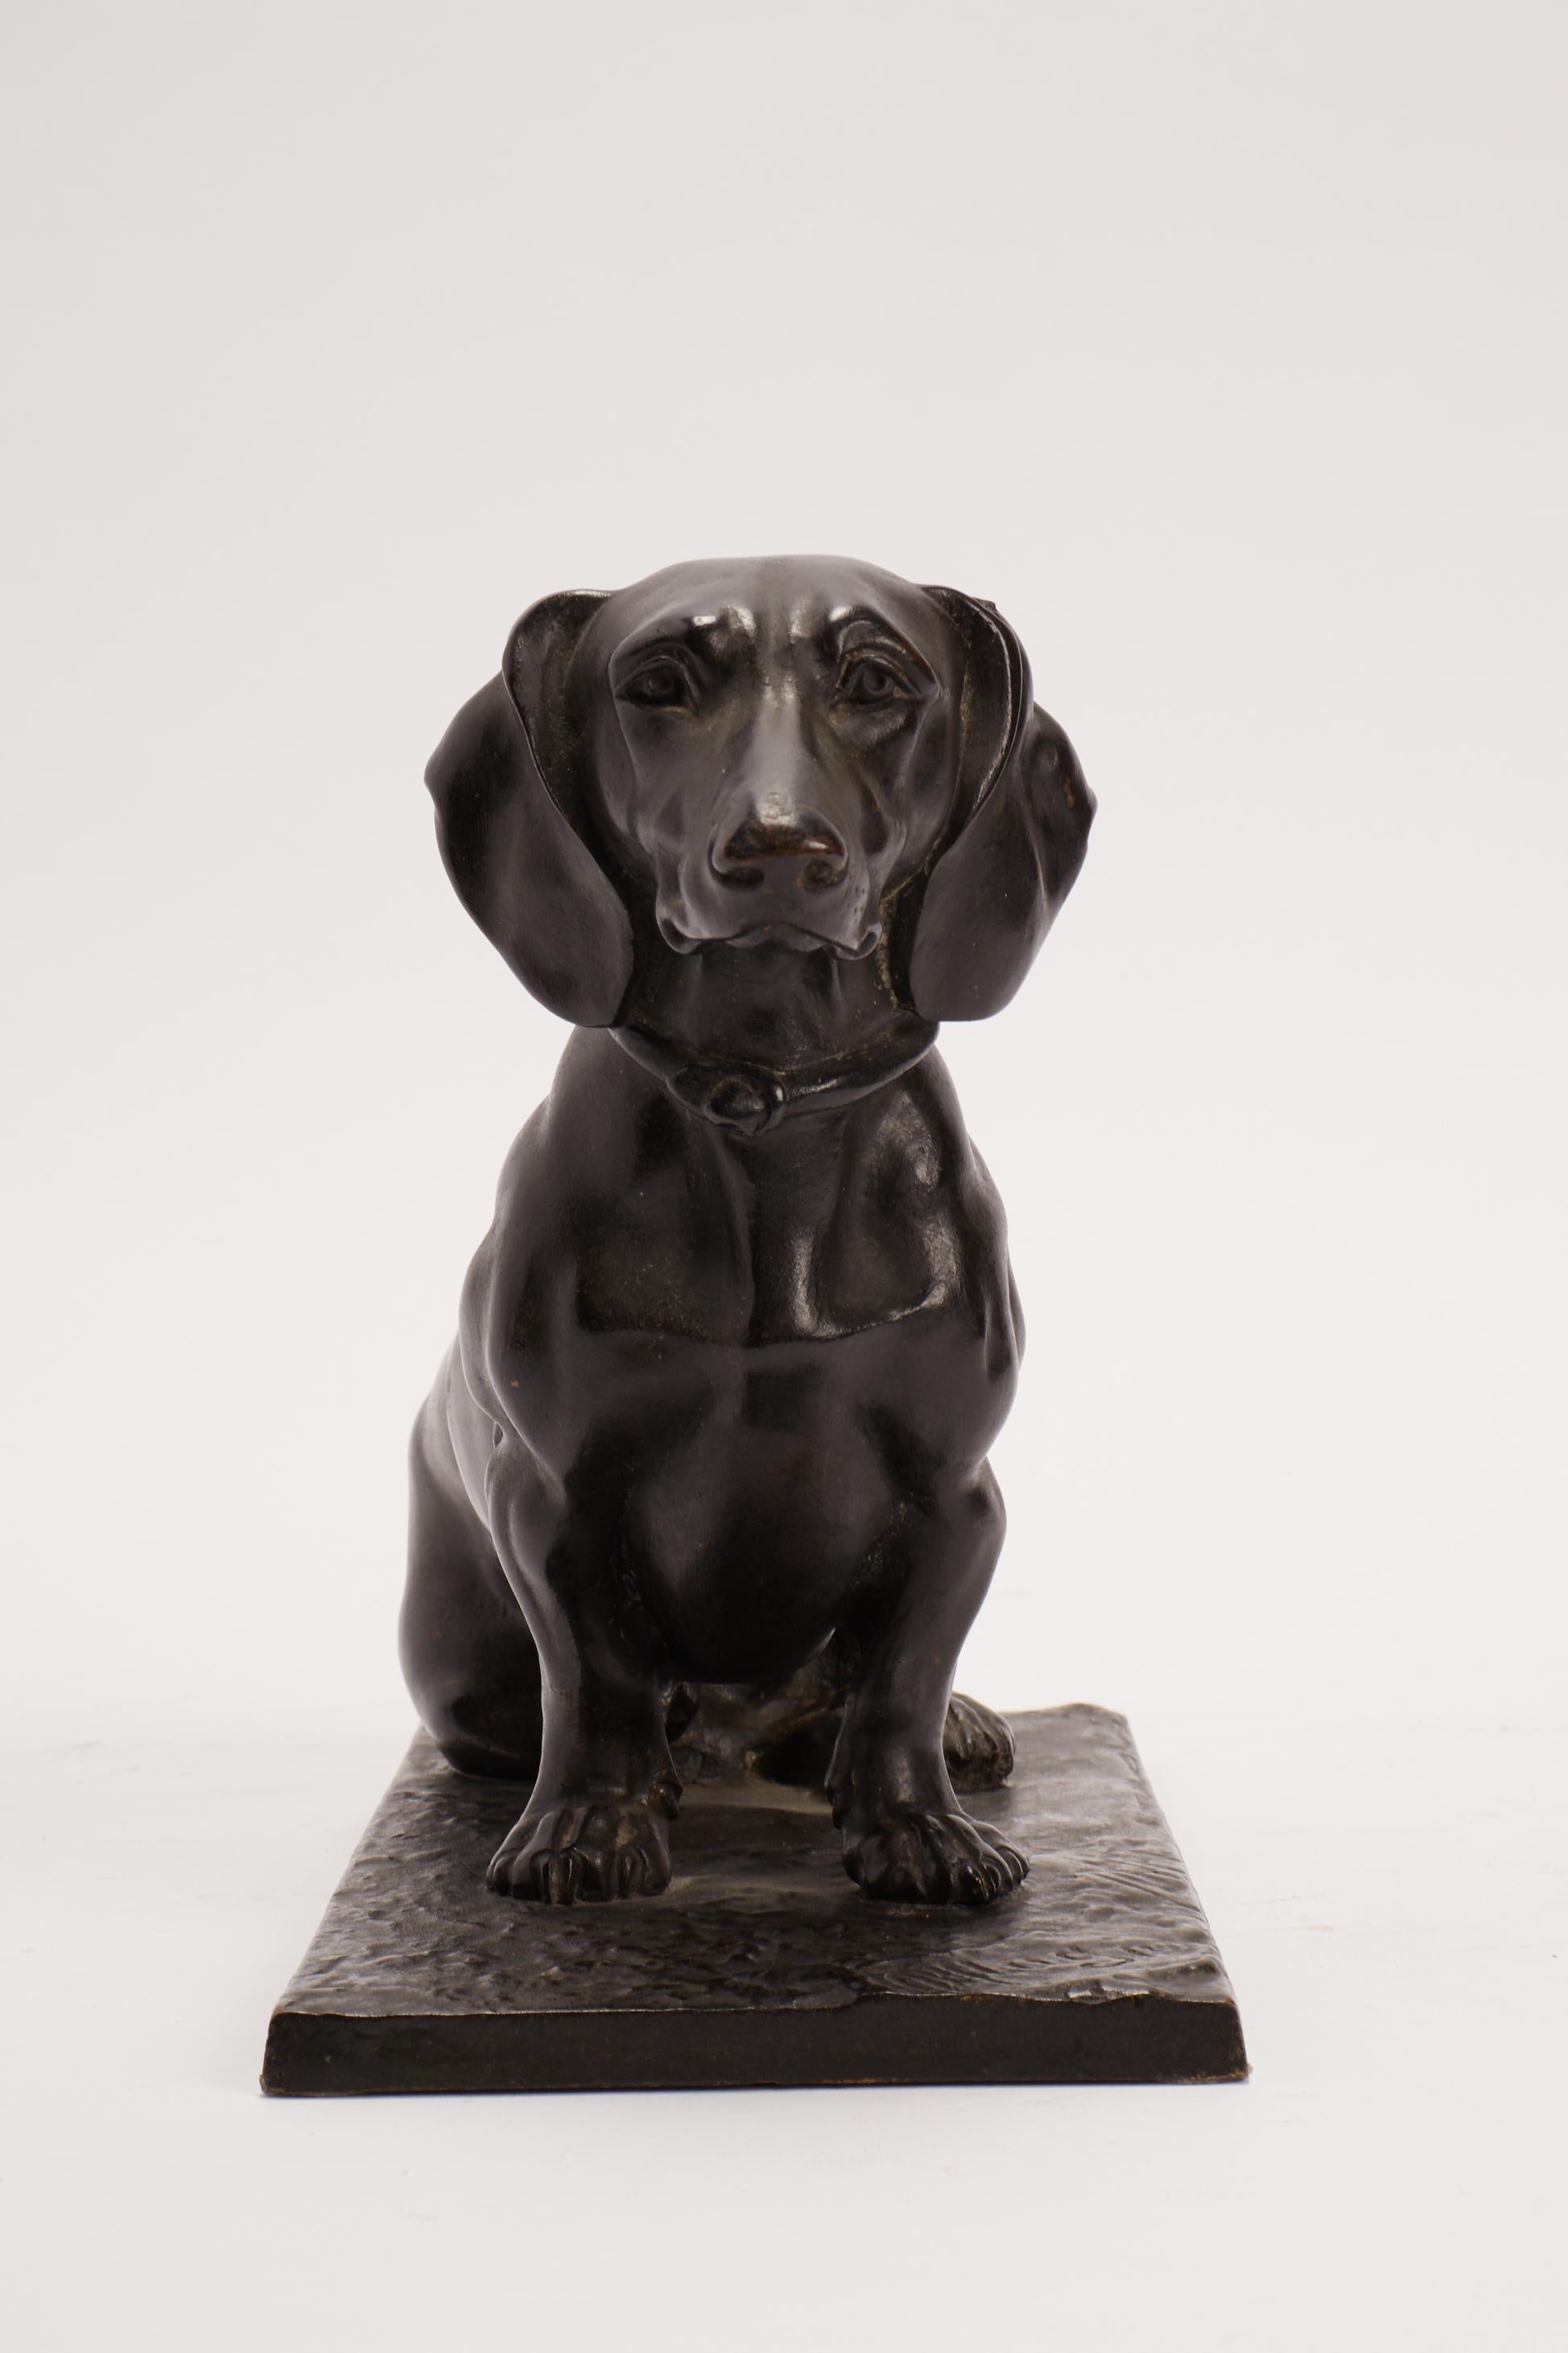 Bronze sculpture depicting a seating dachshund dog. Signed Plug, Germany, circa 1890.